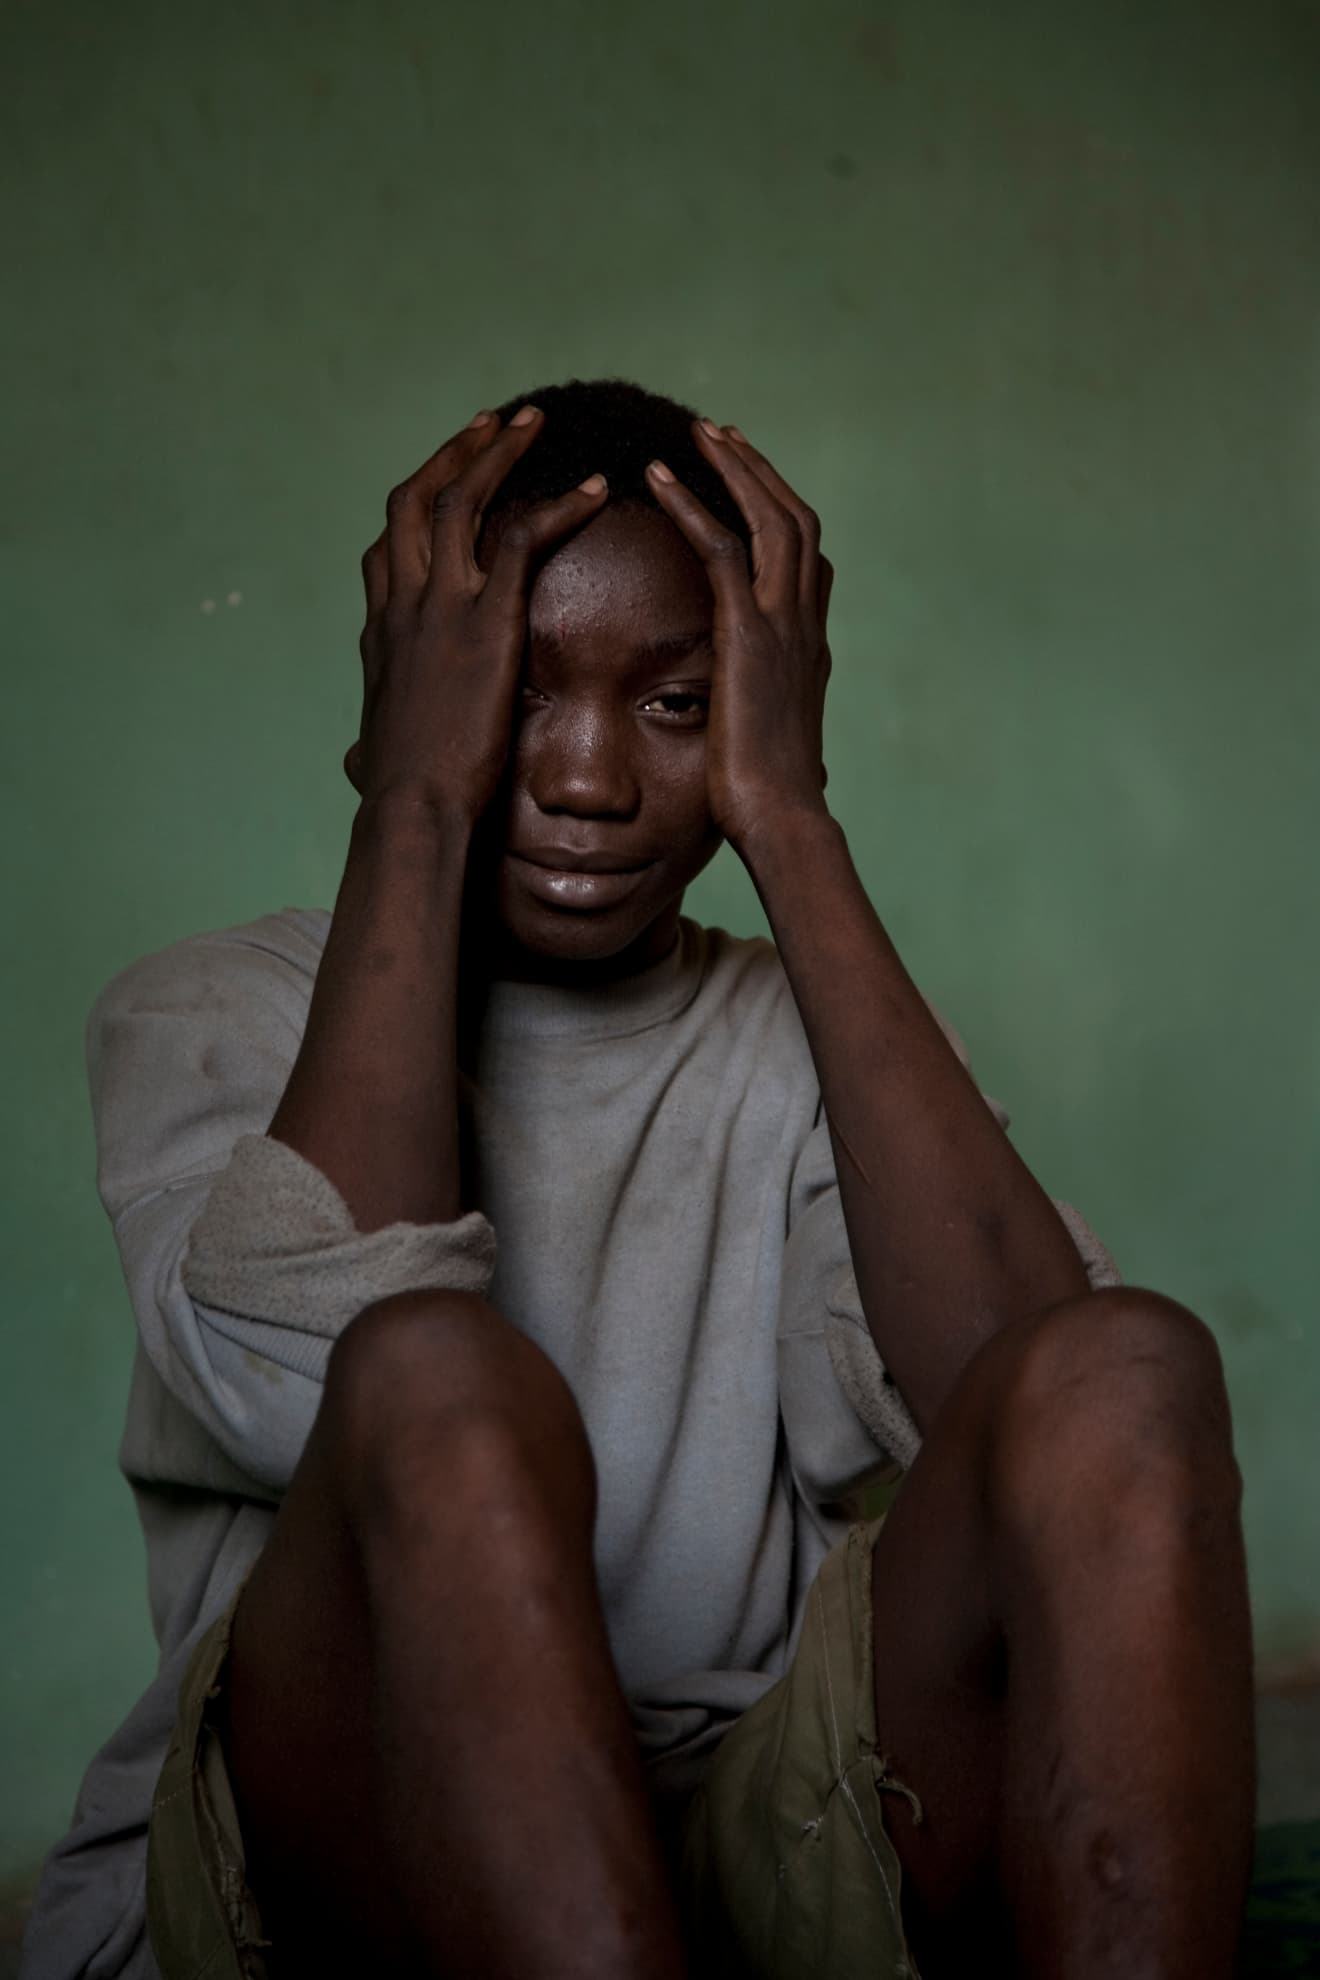 The day on which Mohamed Conteh, 14, is sentenced to three years in prison or the payment of 100,000 leones, after being accused of possessing a packet containing marihuana. As he has no family members to help him, he will have to serve the prison sentence.